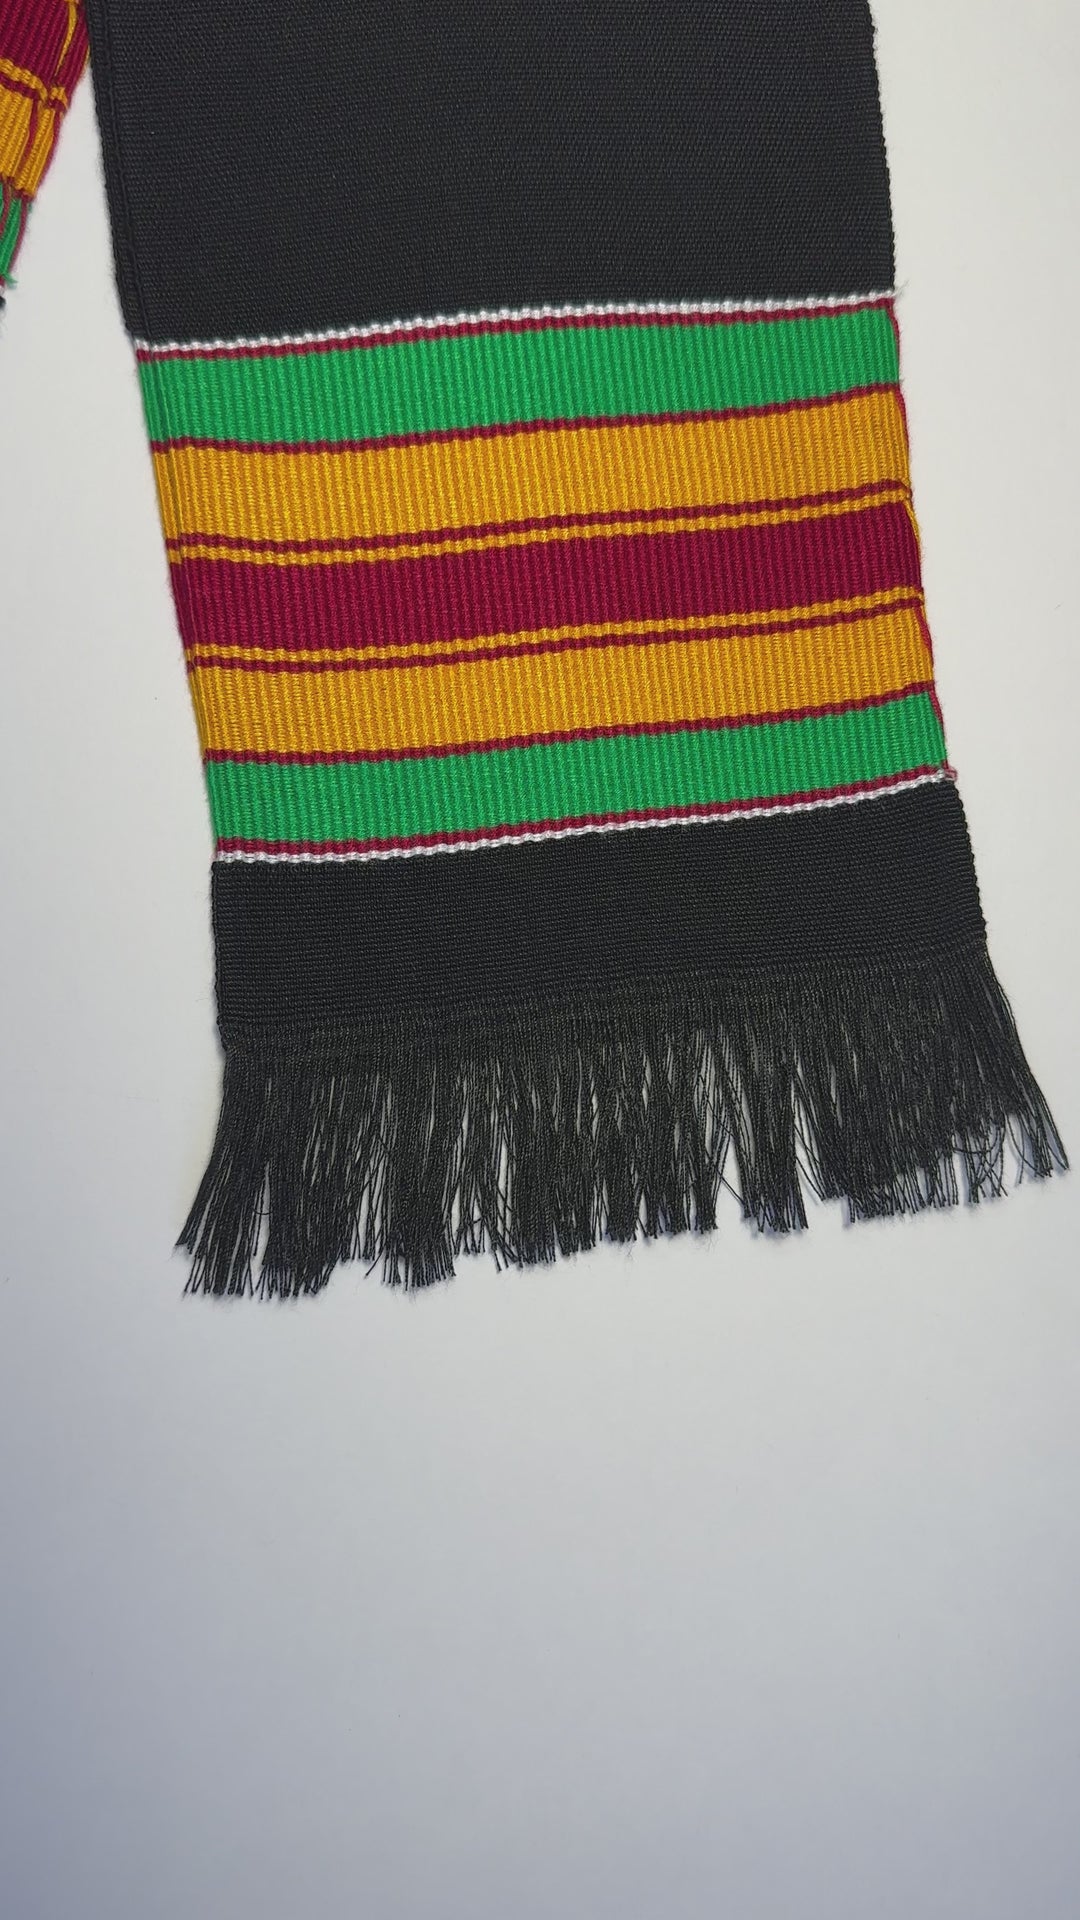 Young, Gifted & Black Class of 2024 Kente Graduation Stole